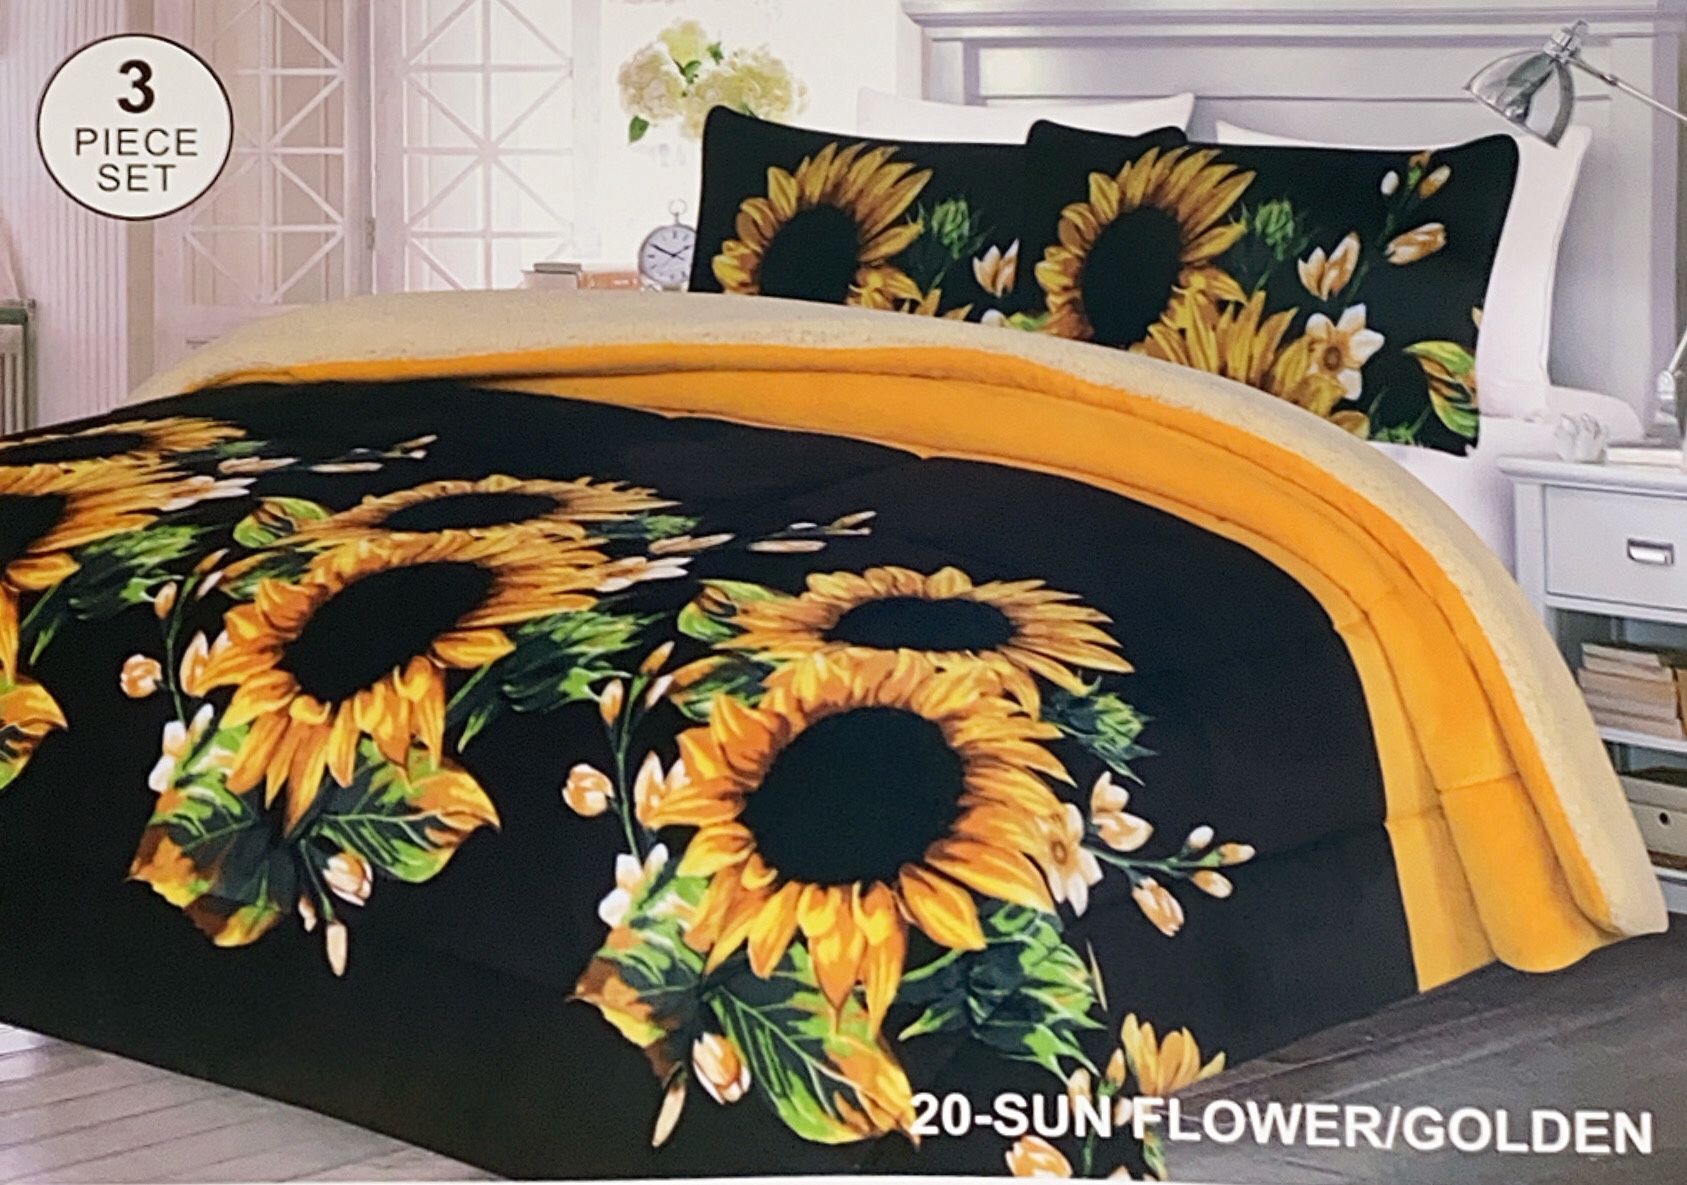 King size sunflower design blanket brand new with two matching pillowcases